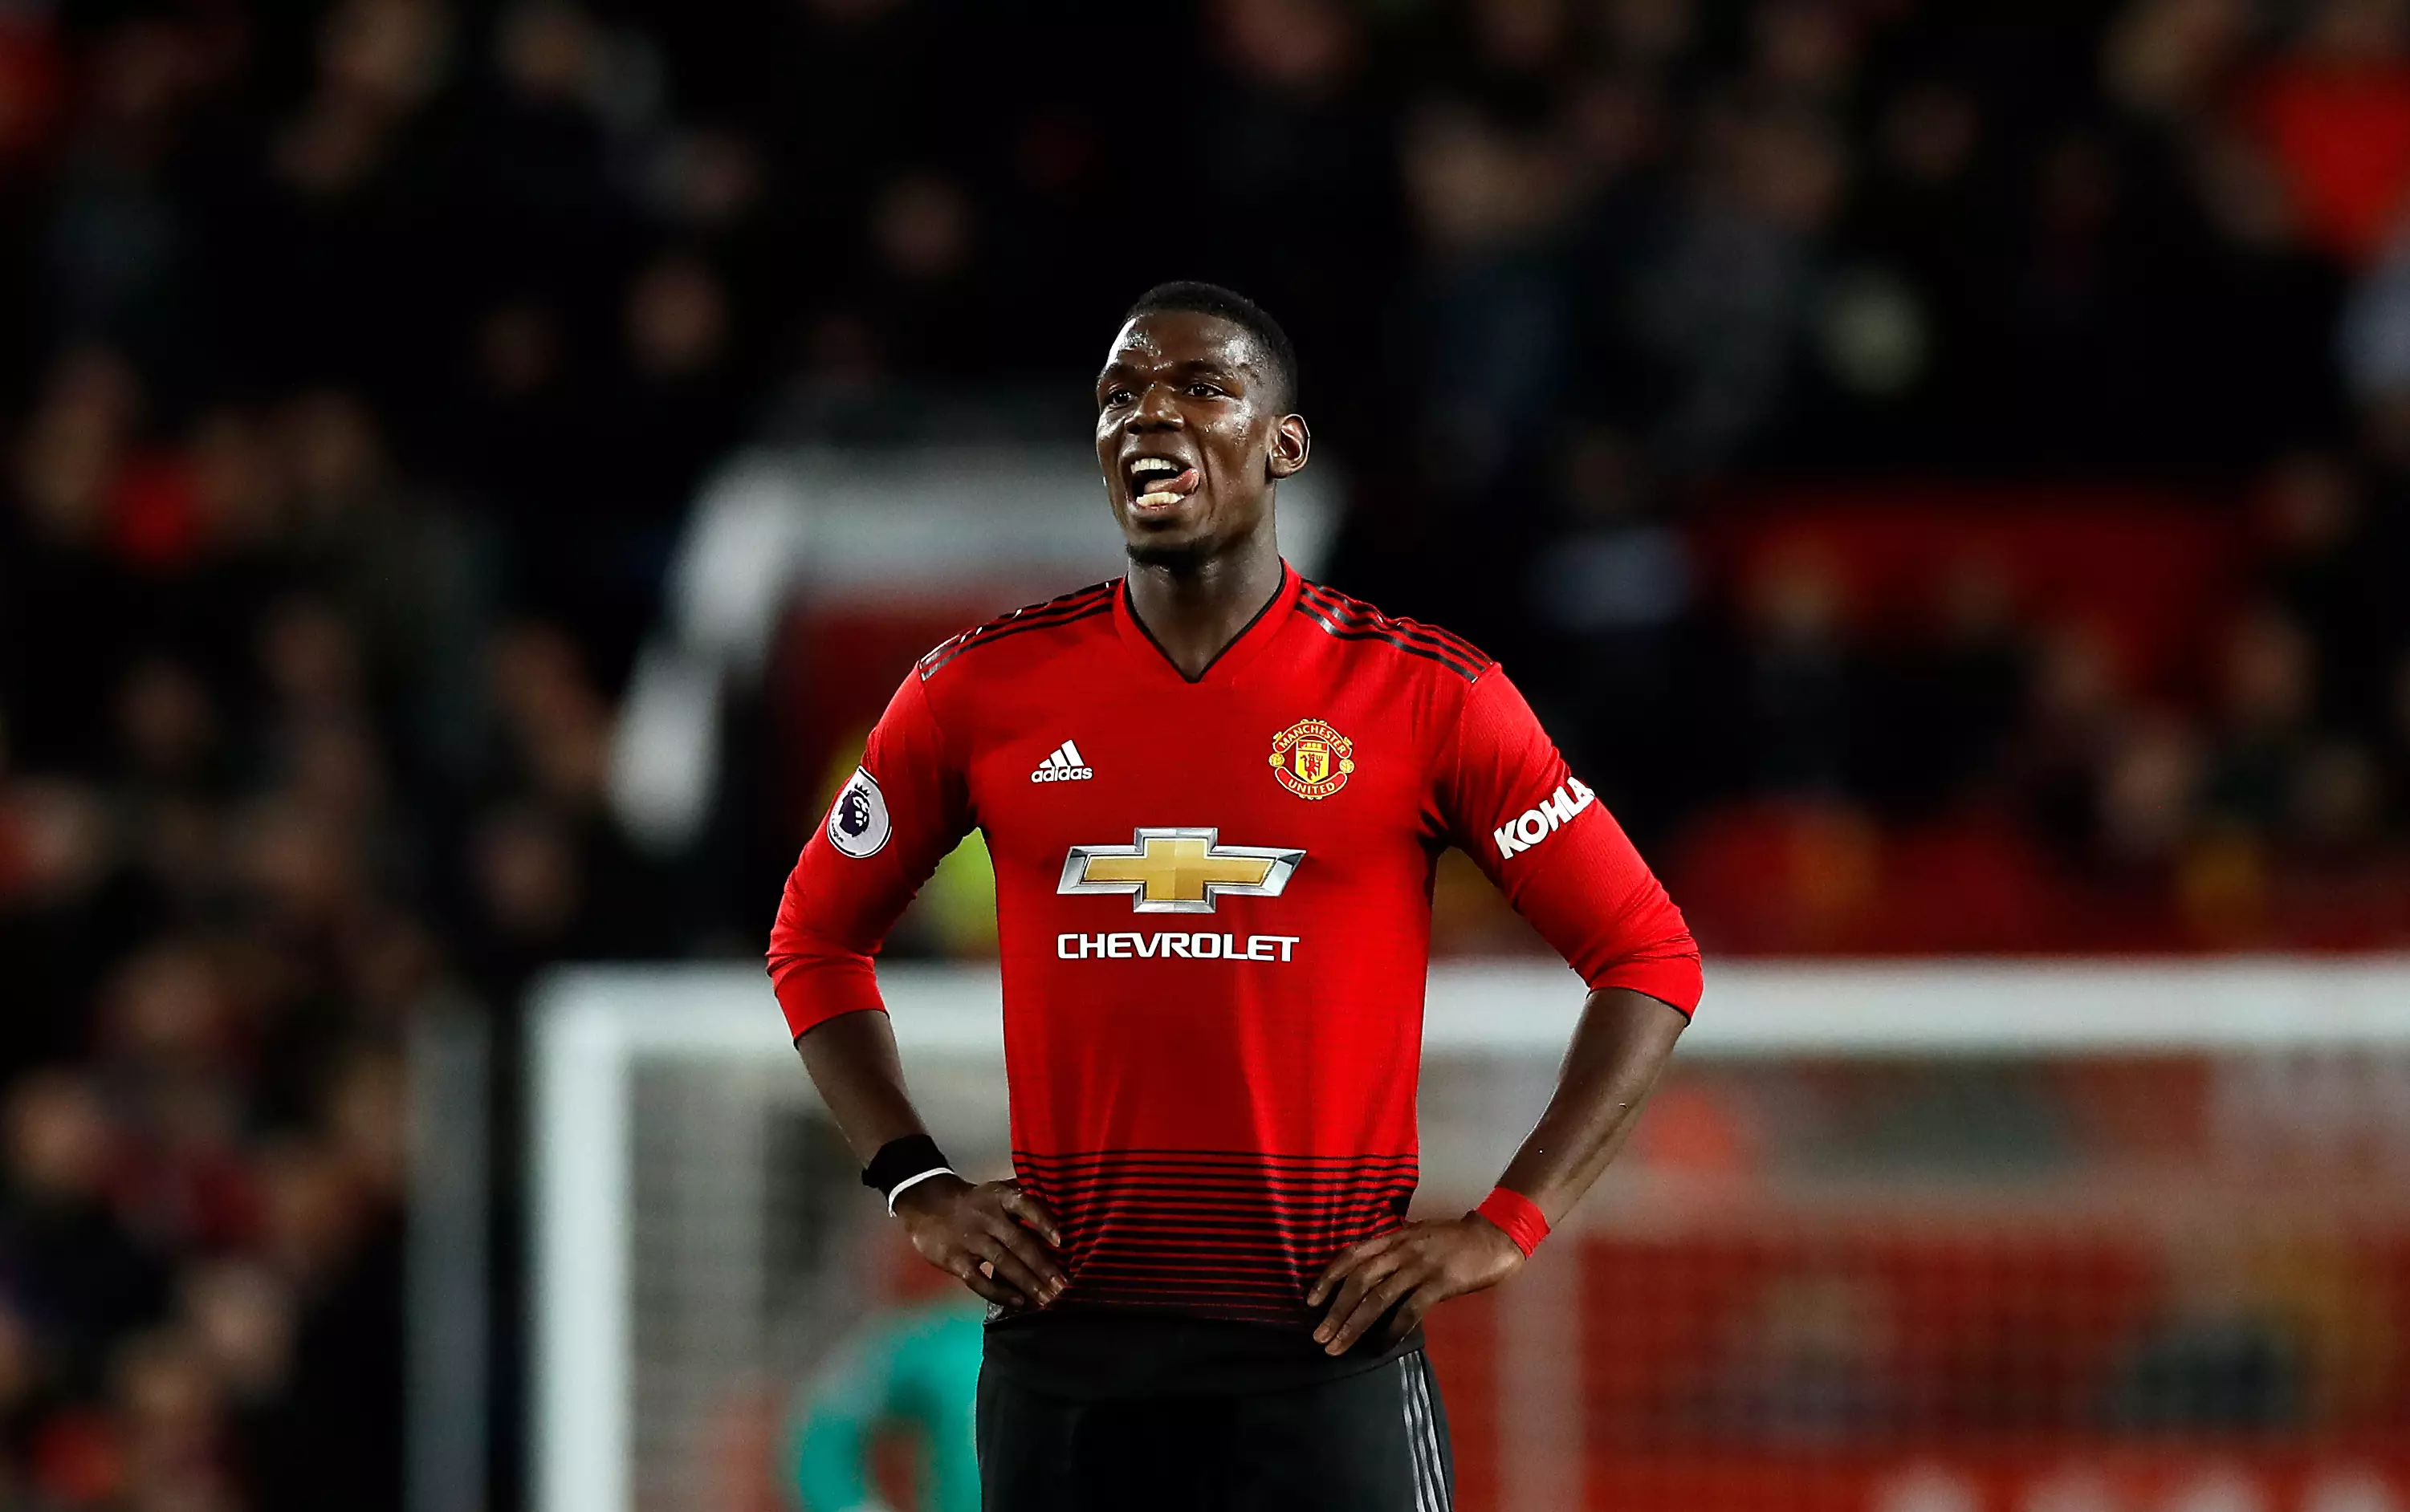 Pogba wasn't happy against Manchester City on Wednesday. Image: PA Images